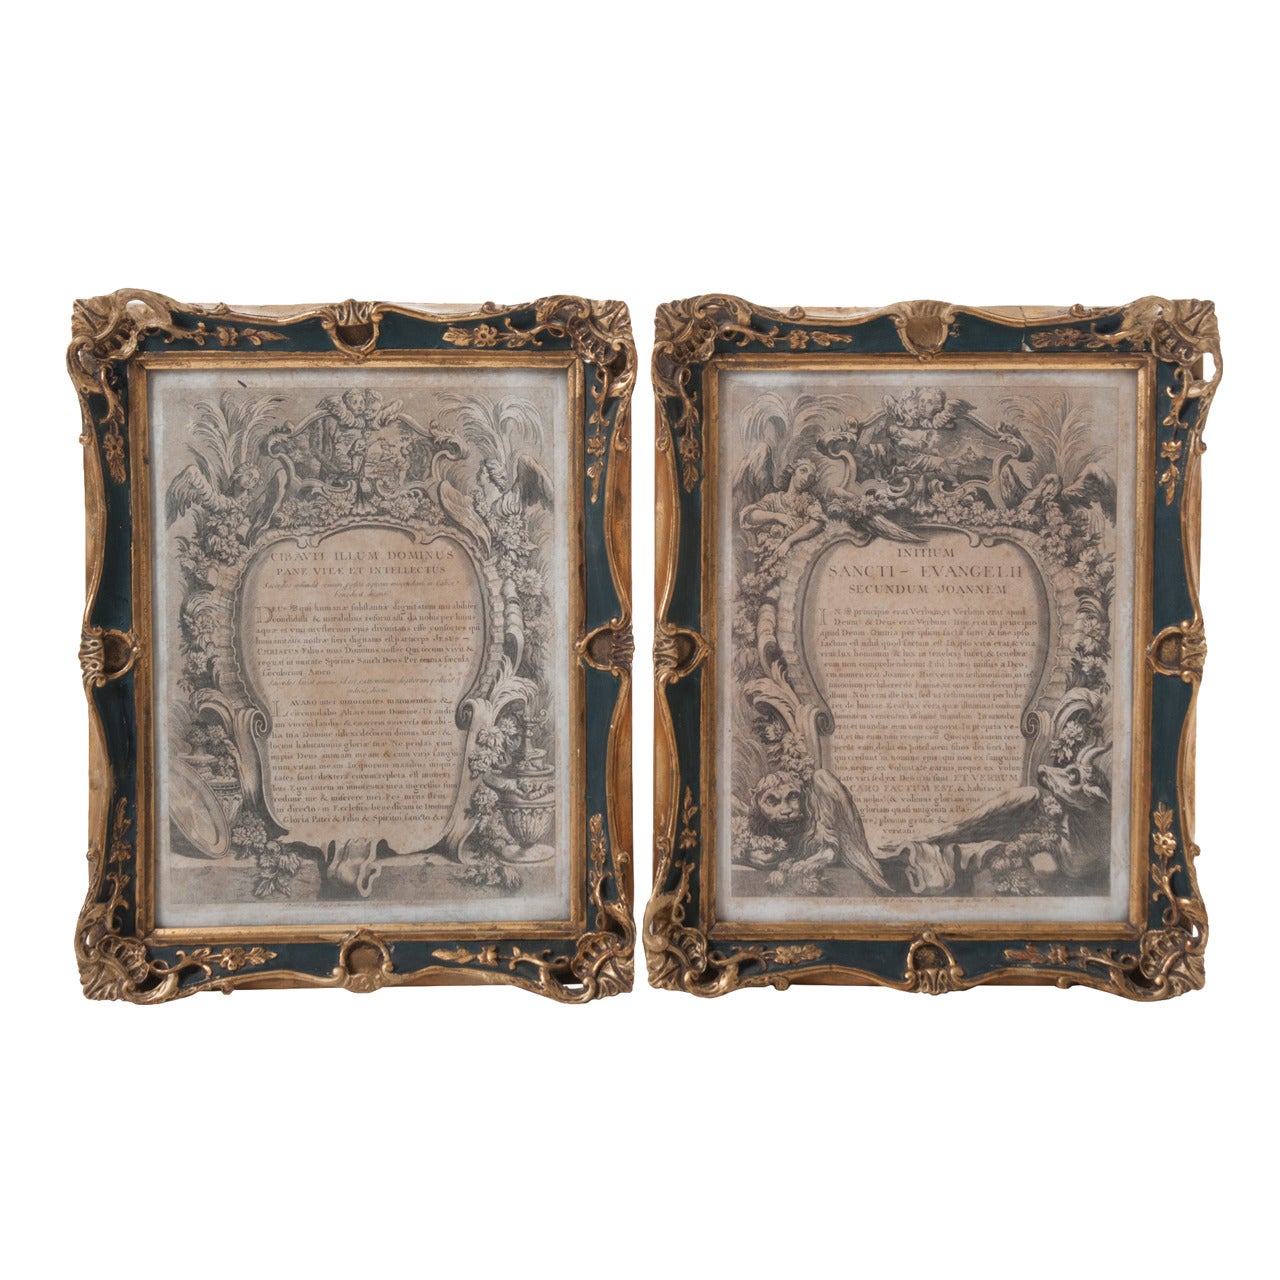 French 19th Century Pair of Framed Lithographs